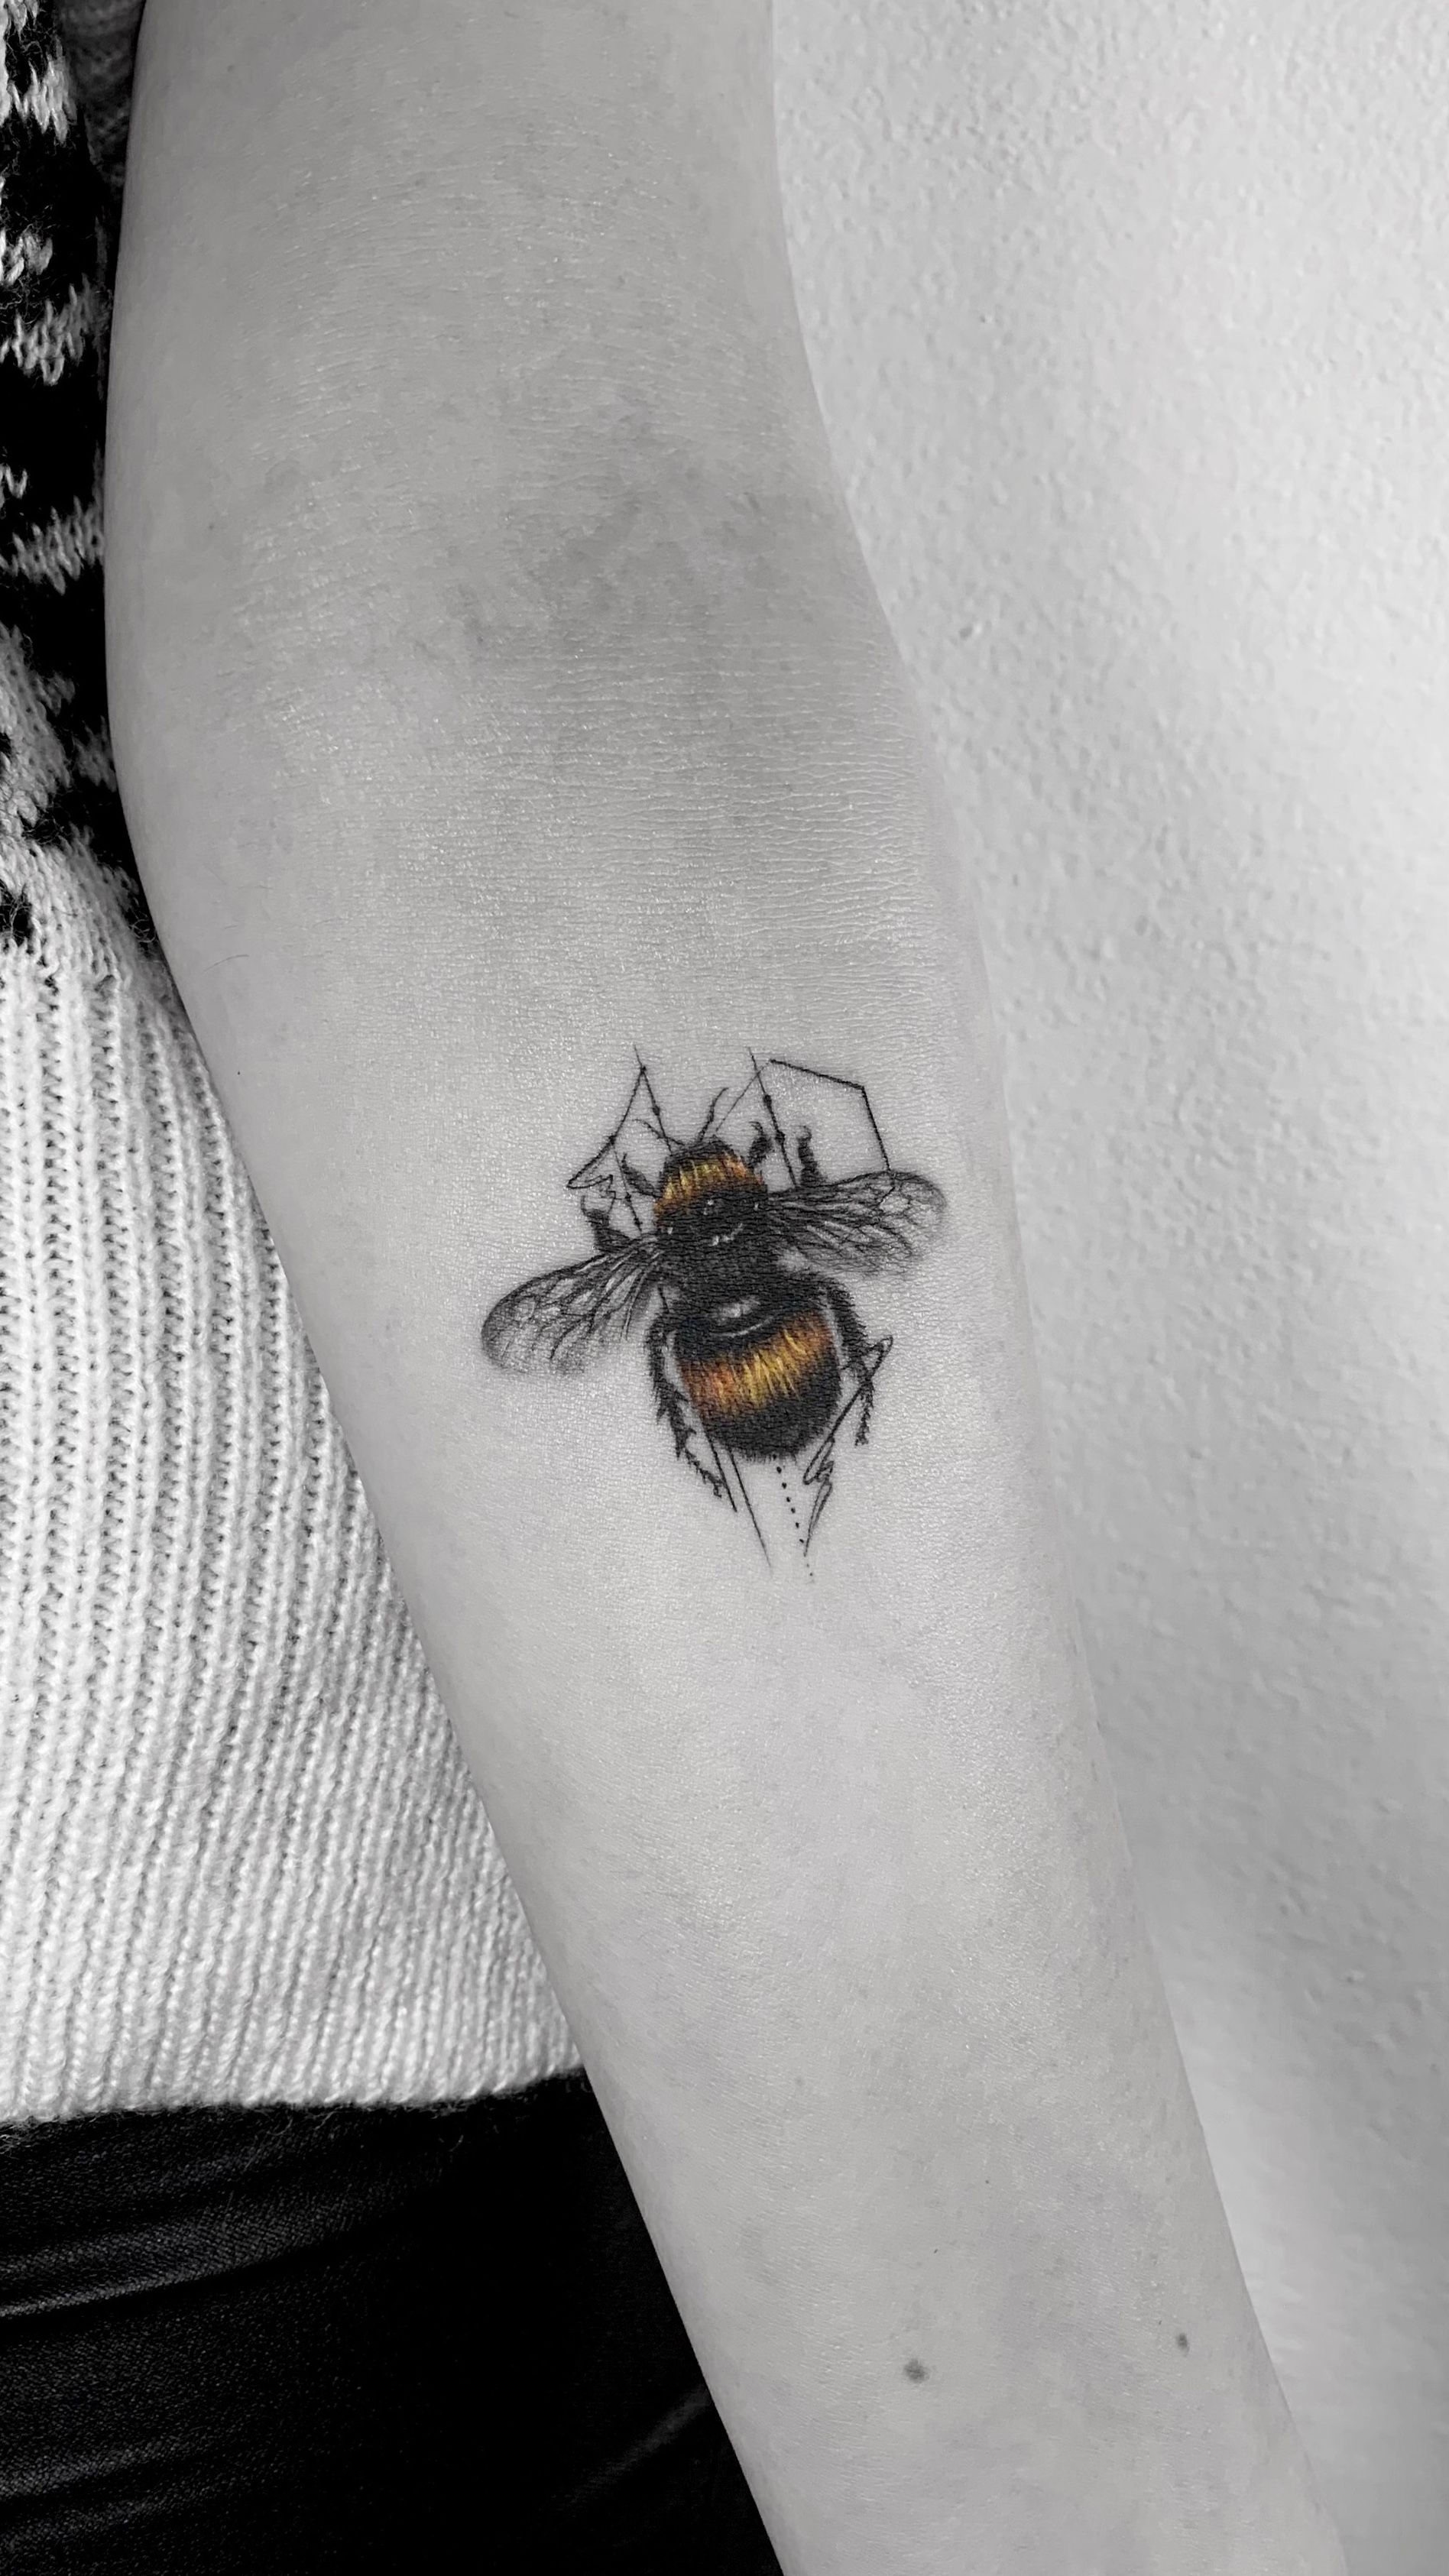 Amazon.com : Realistic Fuzzy Honey Bee Temporary Tattoo Water Resistant  Fake Body Art Set Collection - Black (One Sheet) : Beauty & Personal Care